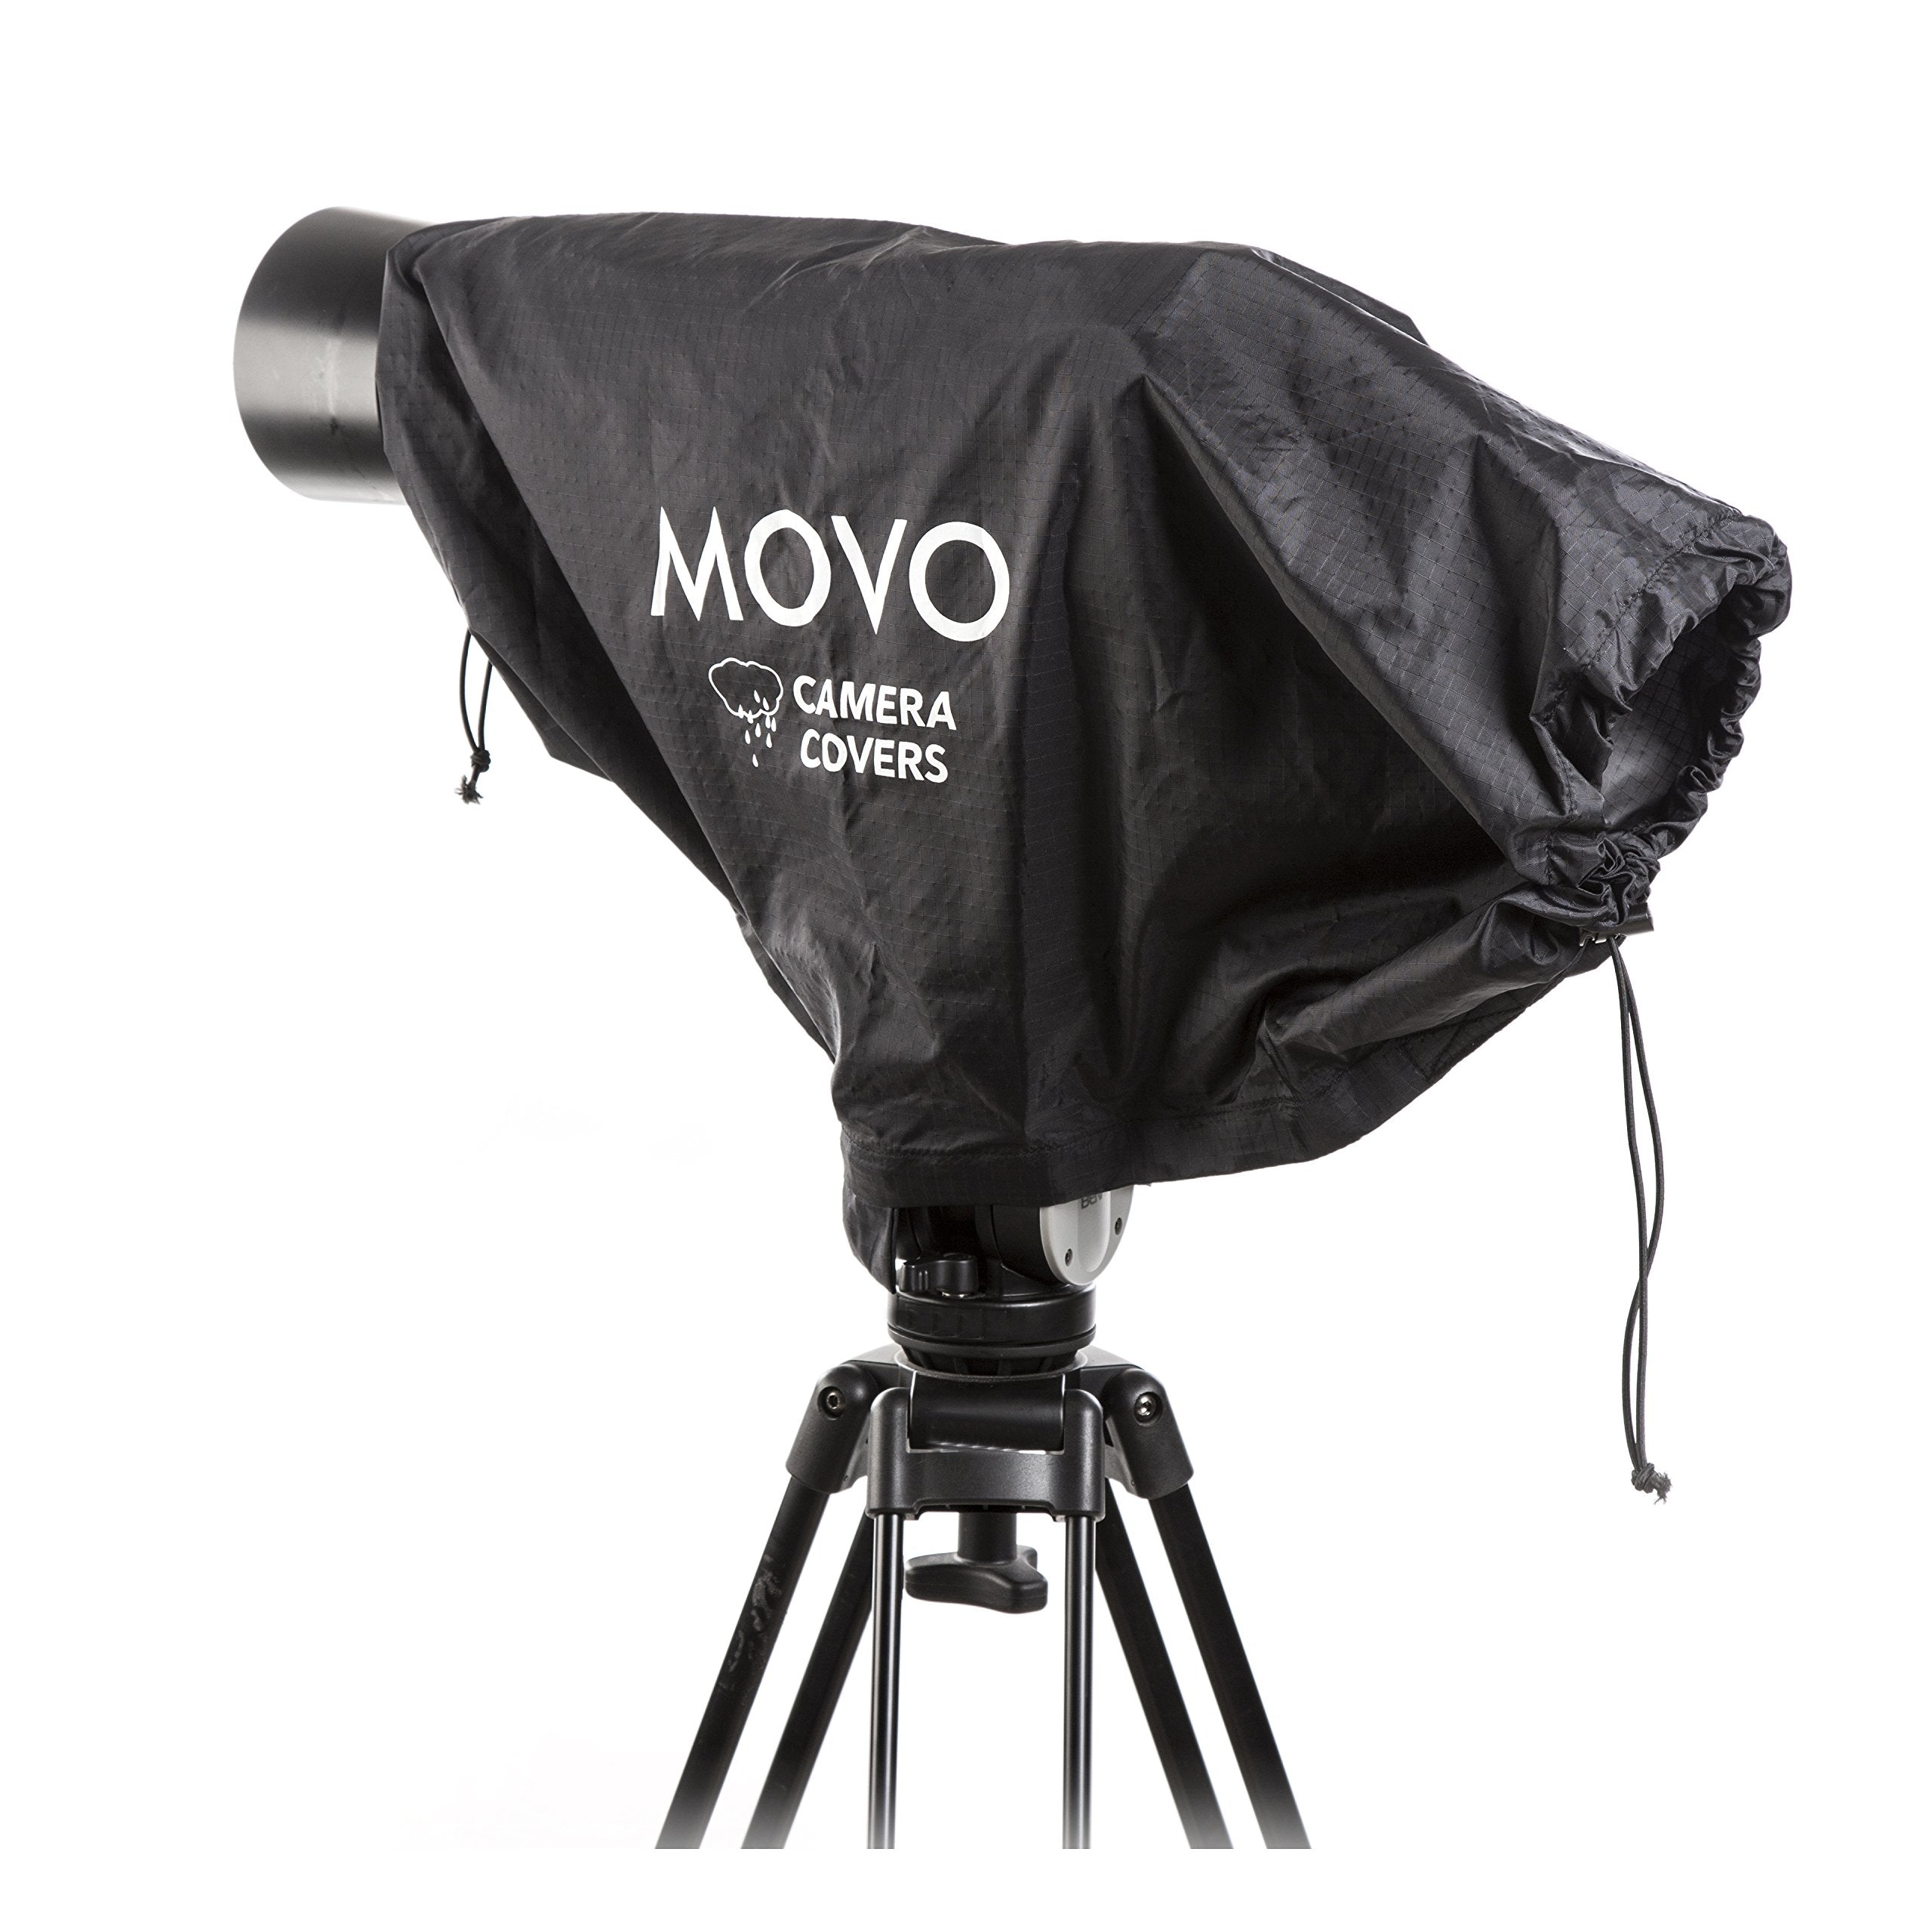 Movo CRC27 Storm Raincover Protector for DSLR Cameras, Lenses, Photographic Equipment (Large Size: 27 x 14.5)  - Very Good